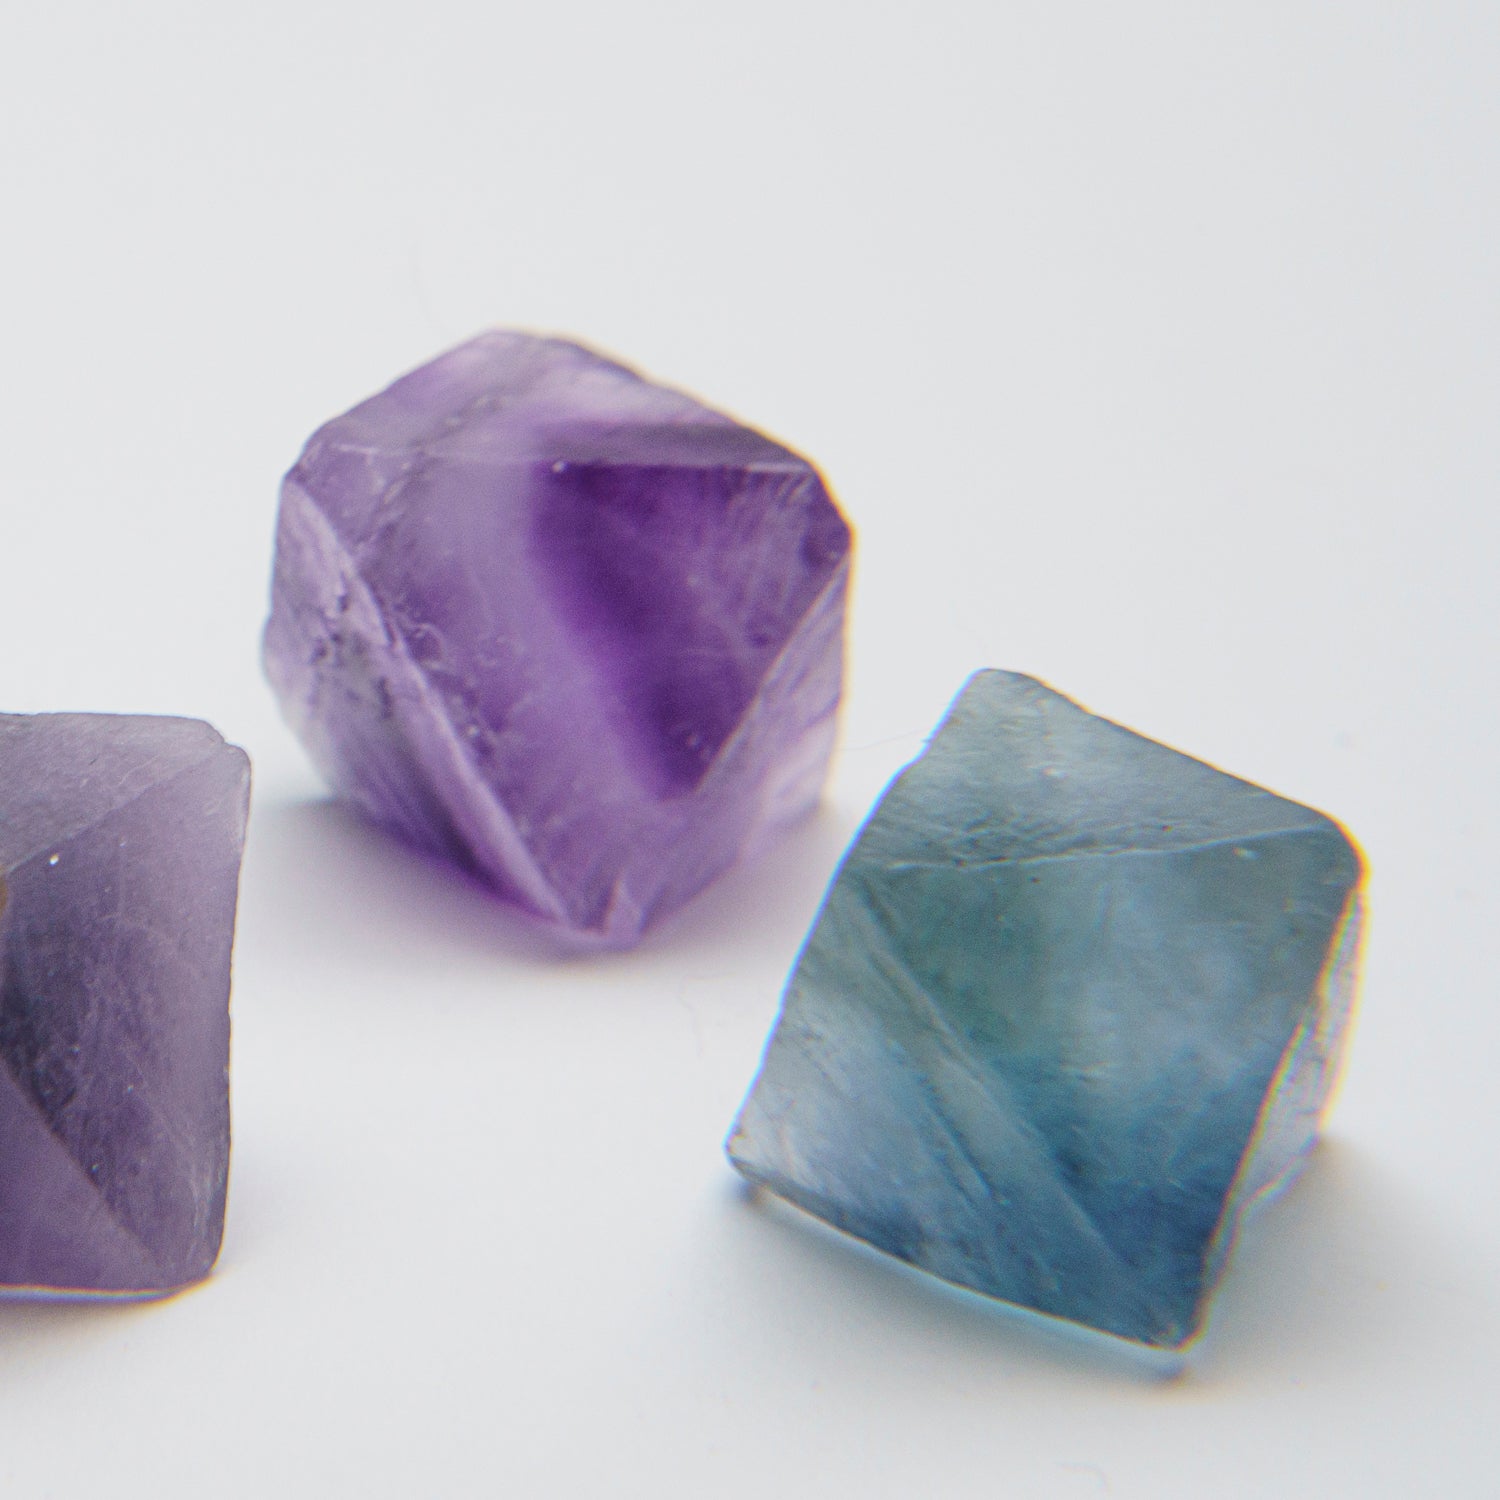 Four Translucent Fluorite Palm Crystals (Small) from China